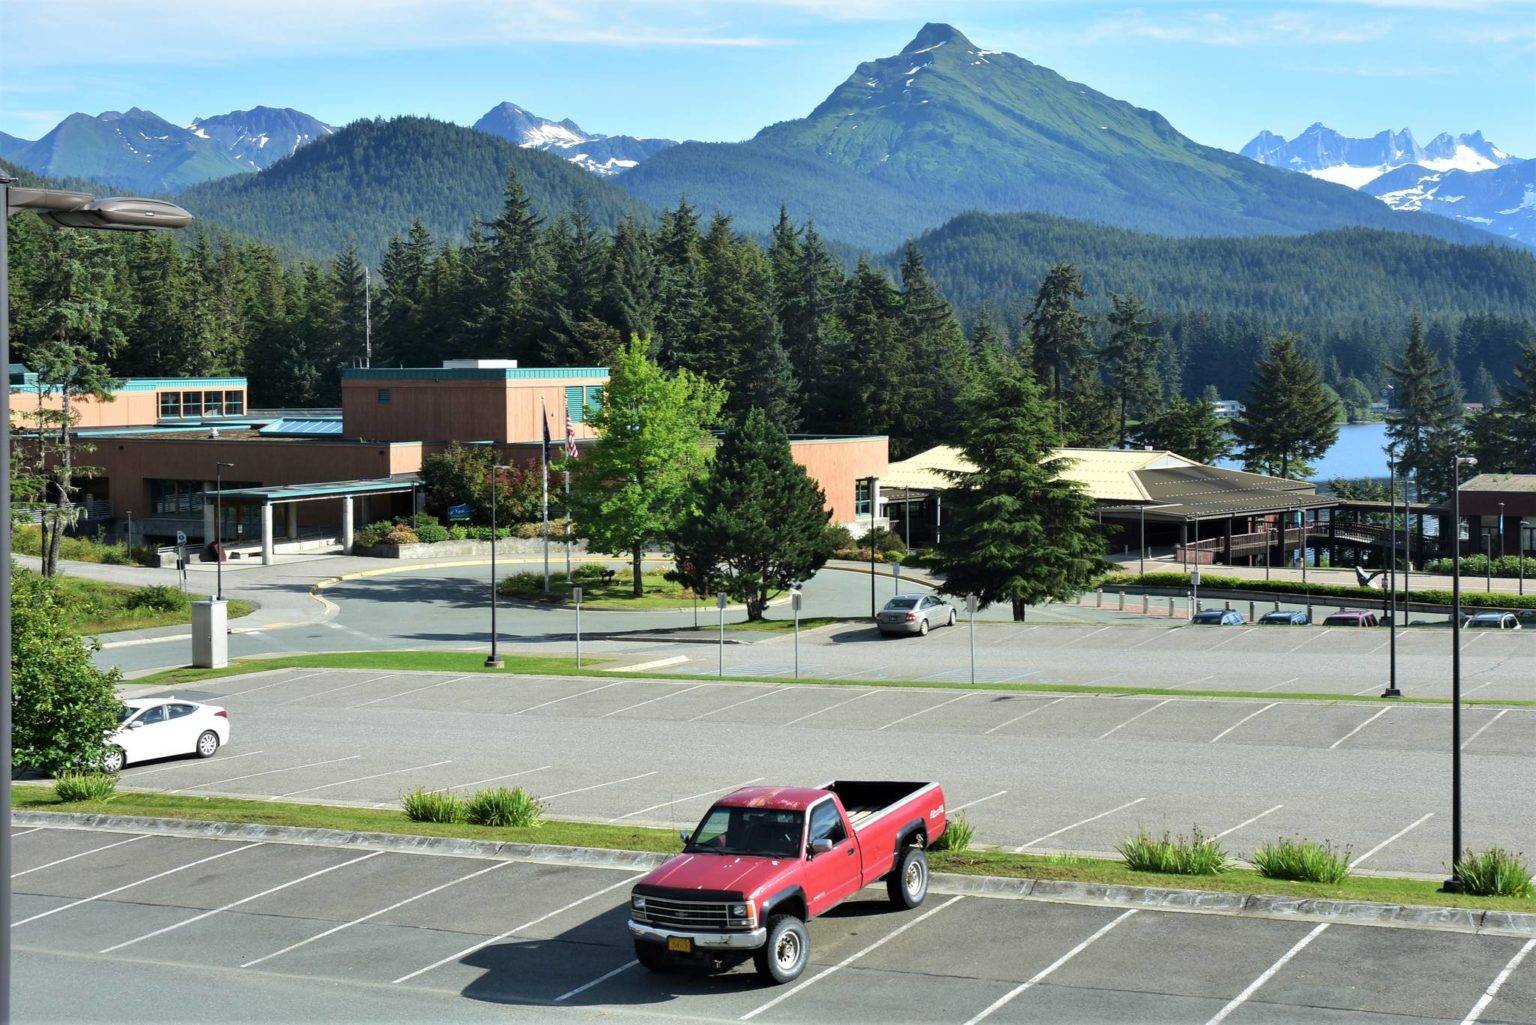 The University of Alaska Southeast Juneau campus on July 31, 2020. UAS and Willamette University College of Law recently announced a direct admissions partnership between the two schools to try and make it easier for Alaskan students to study law. (Peter Segall / Juneau Empire File)